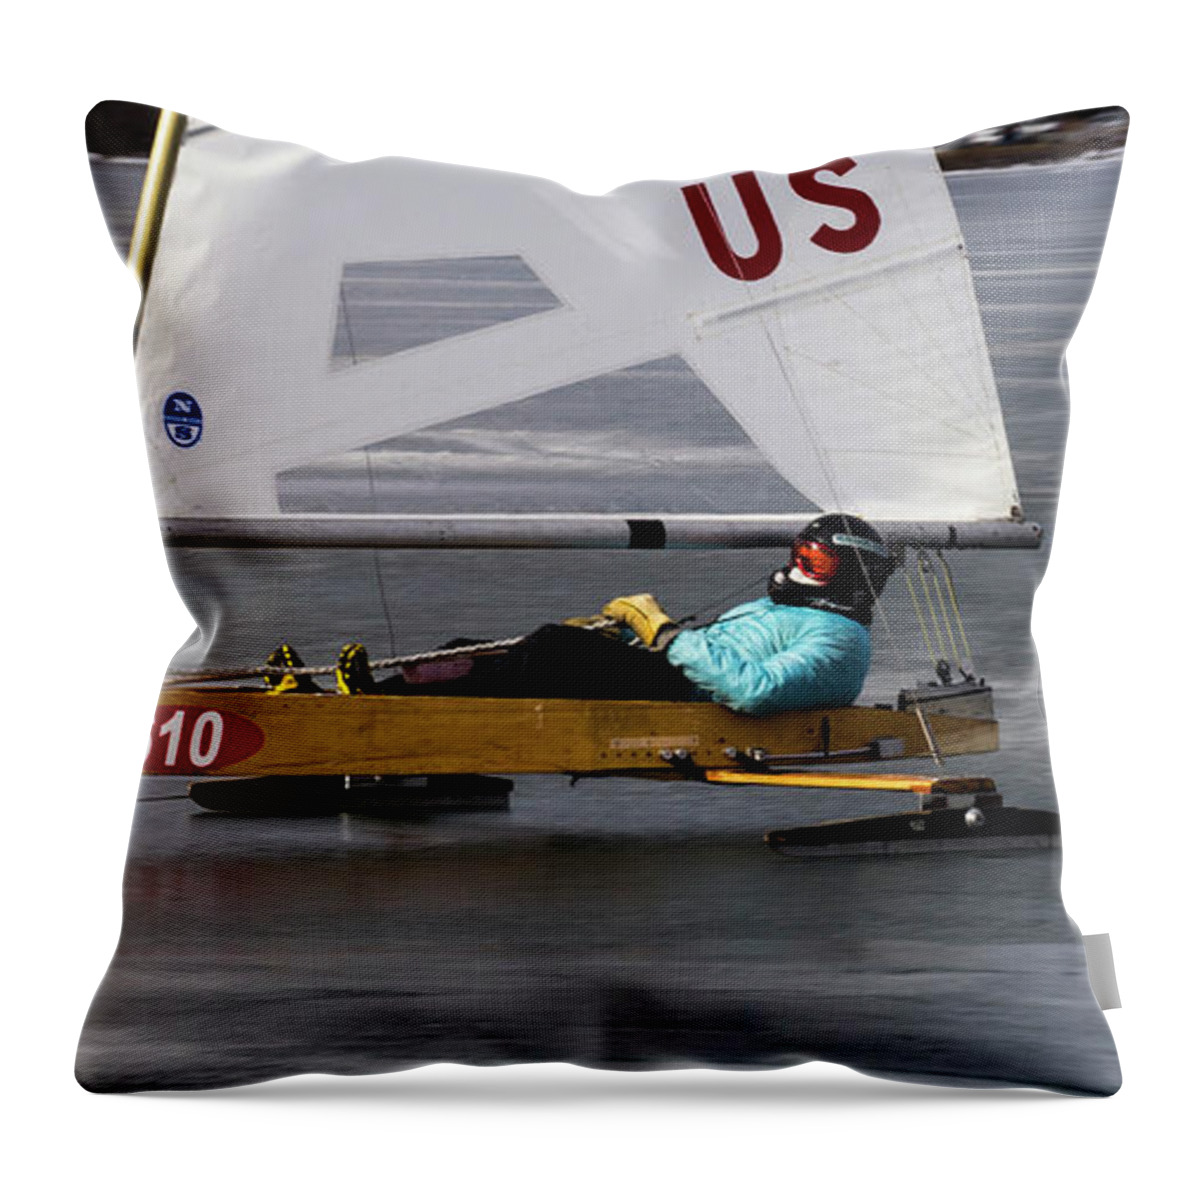 Ice Boat Throw Pillow featuring the photograph Ice Boat - Madison - Wisconsin by Steven Ralser